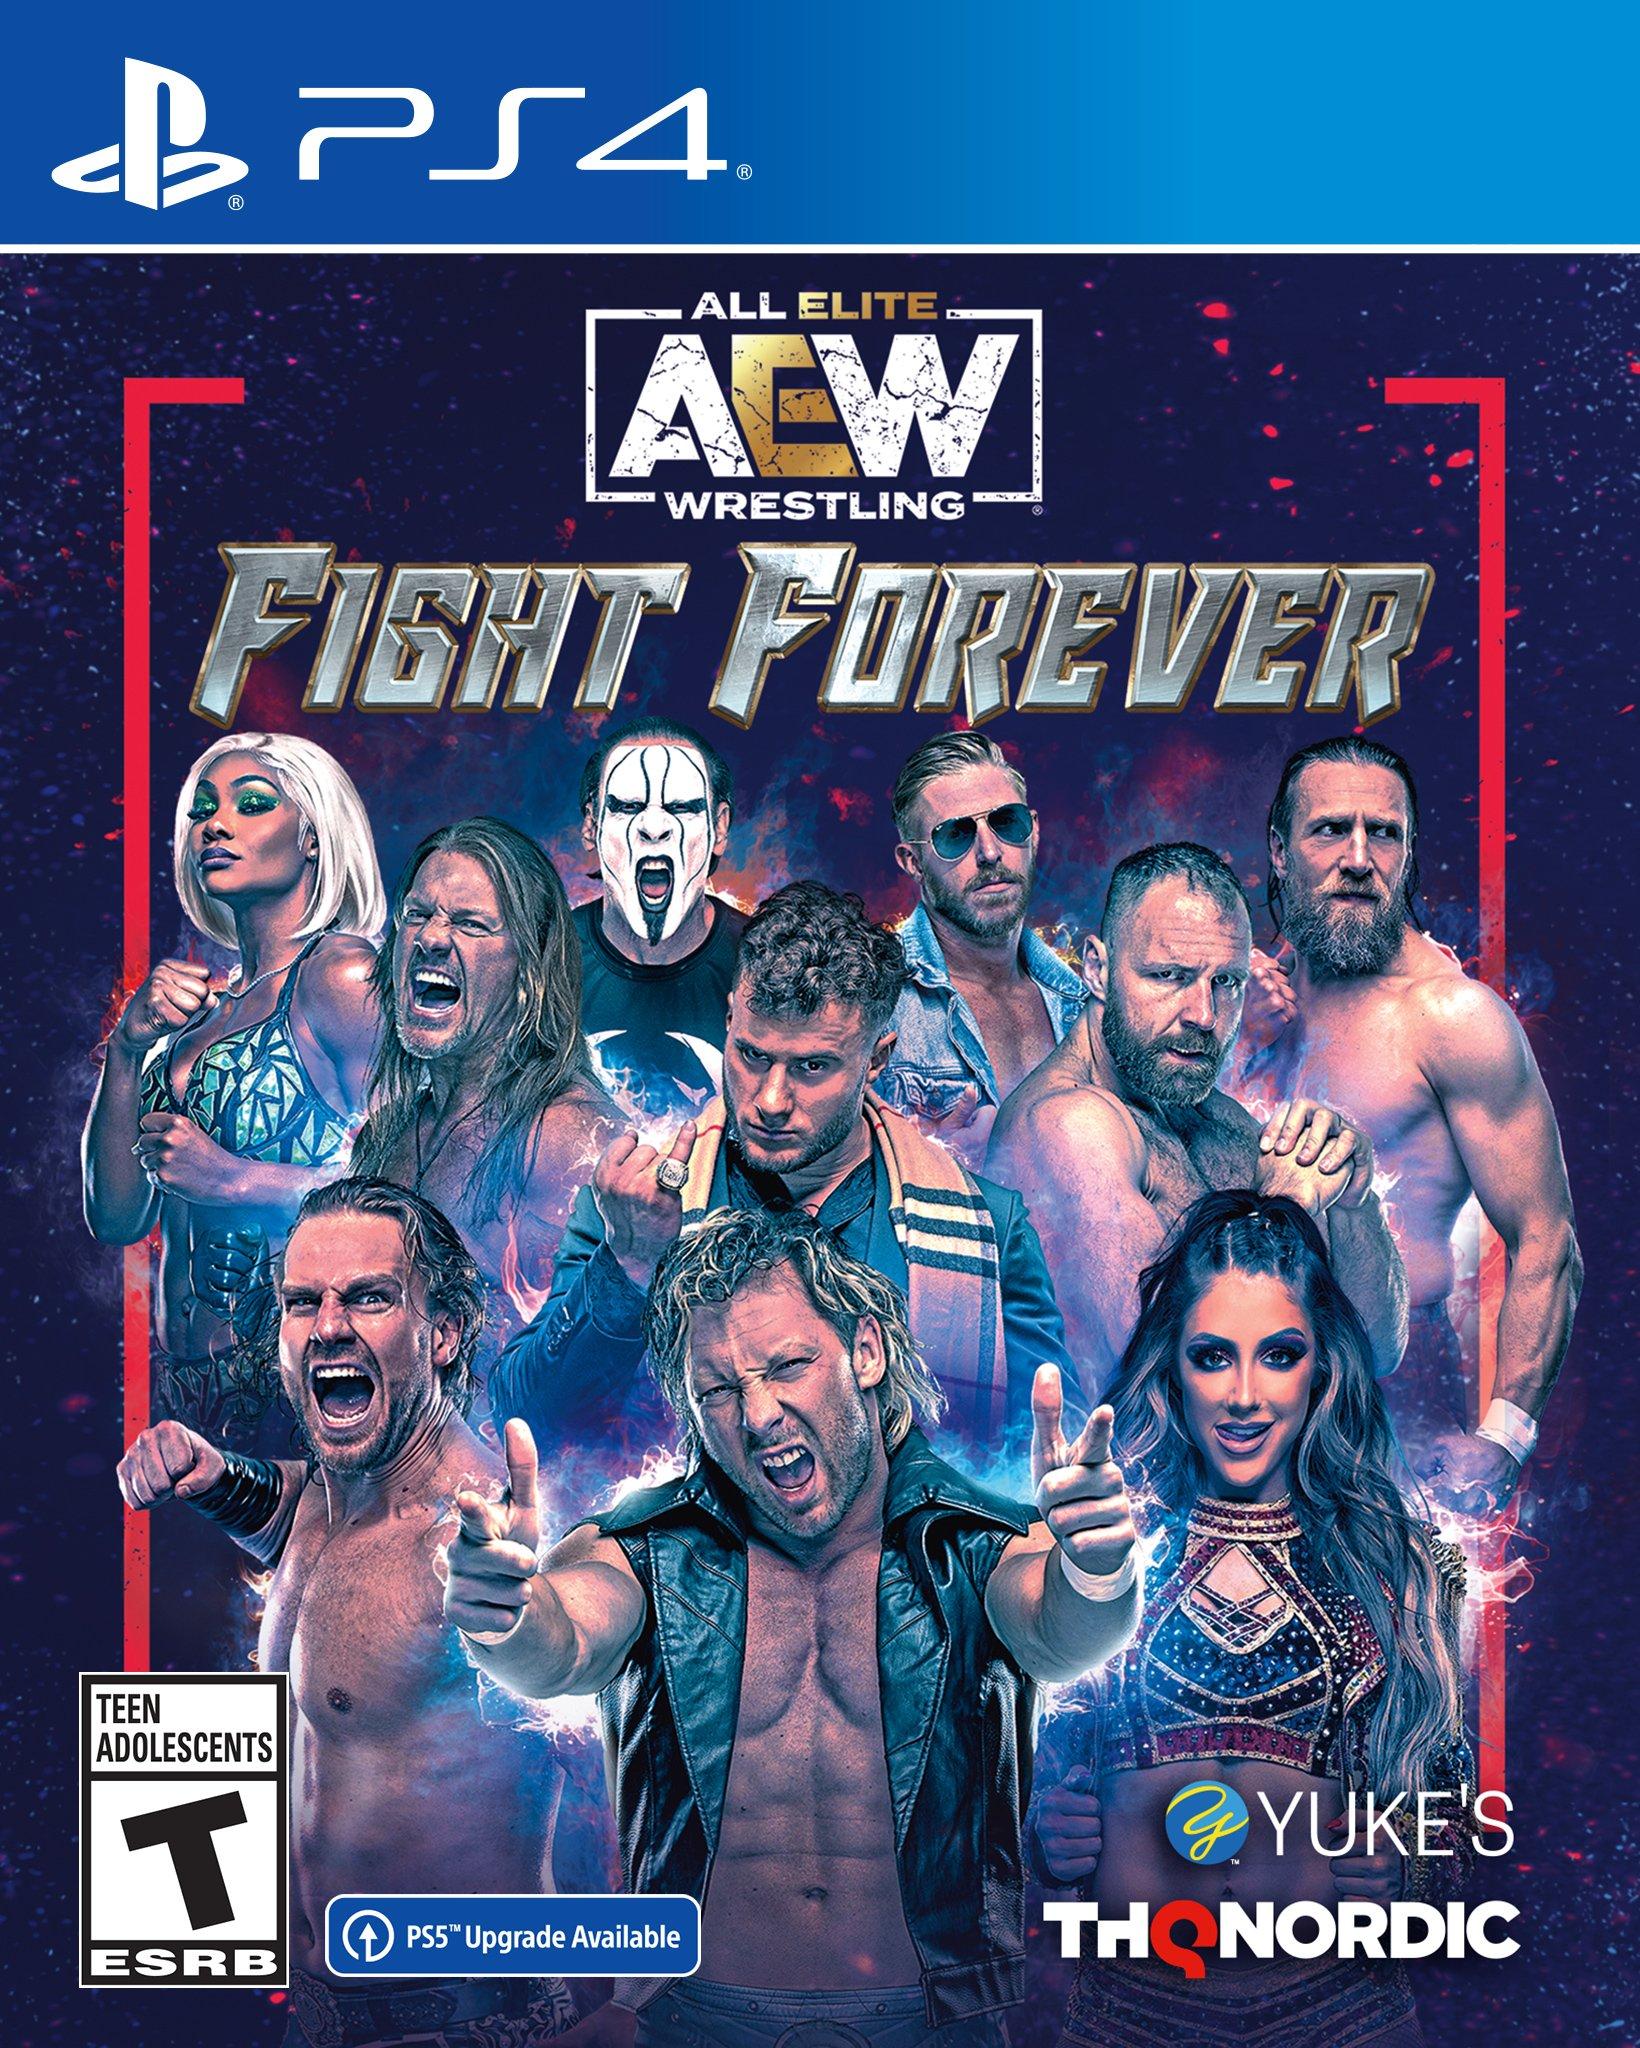 mode Invitere Henfald AEW: Fight Forever - PlayStation 4 | PlayStation 4 | GameStop